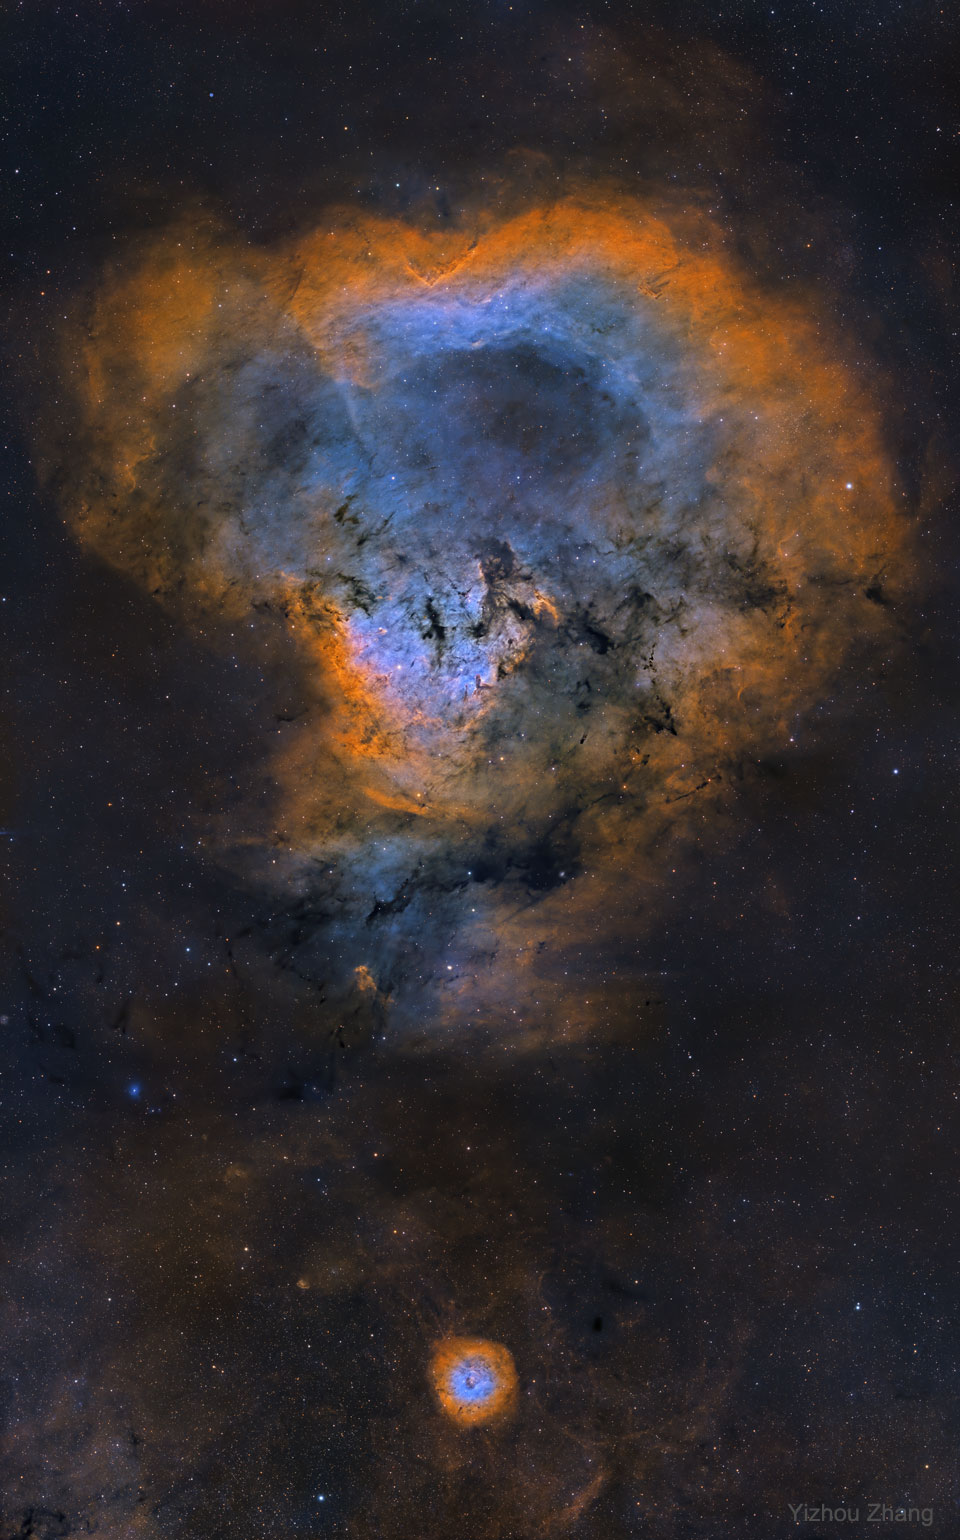 The picture shows a NGC 7822, known informally as
 the Cosmic Question Mark Nebula. 
Please see the explanation for more detailed information.